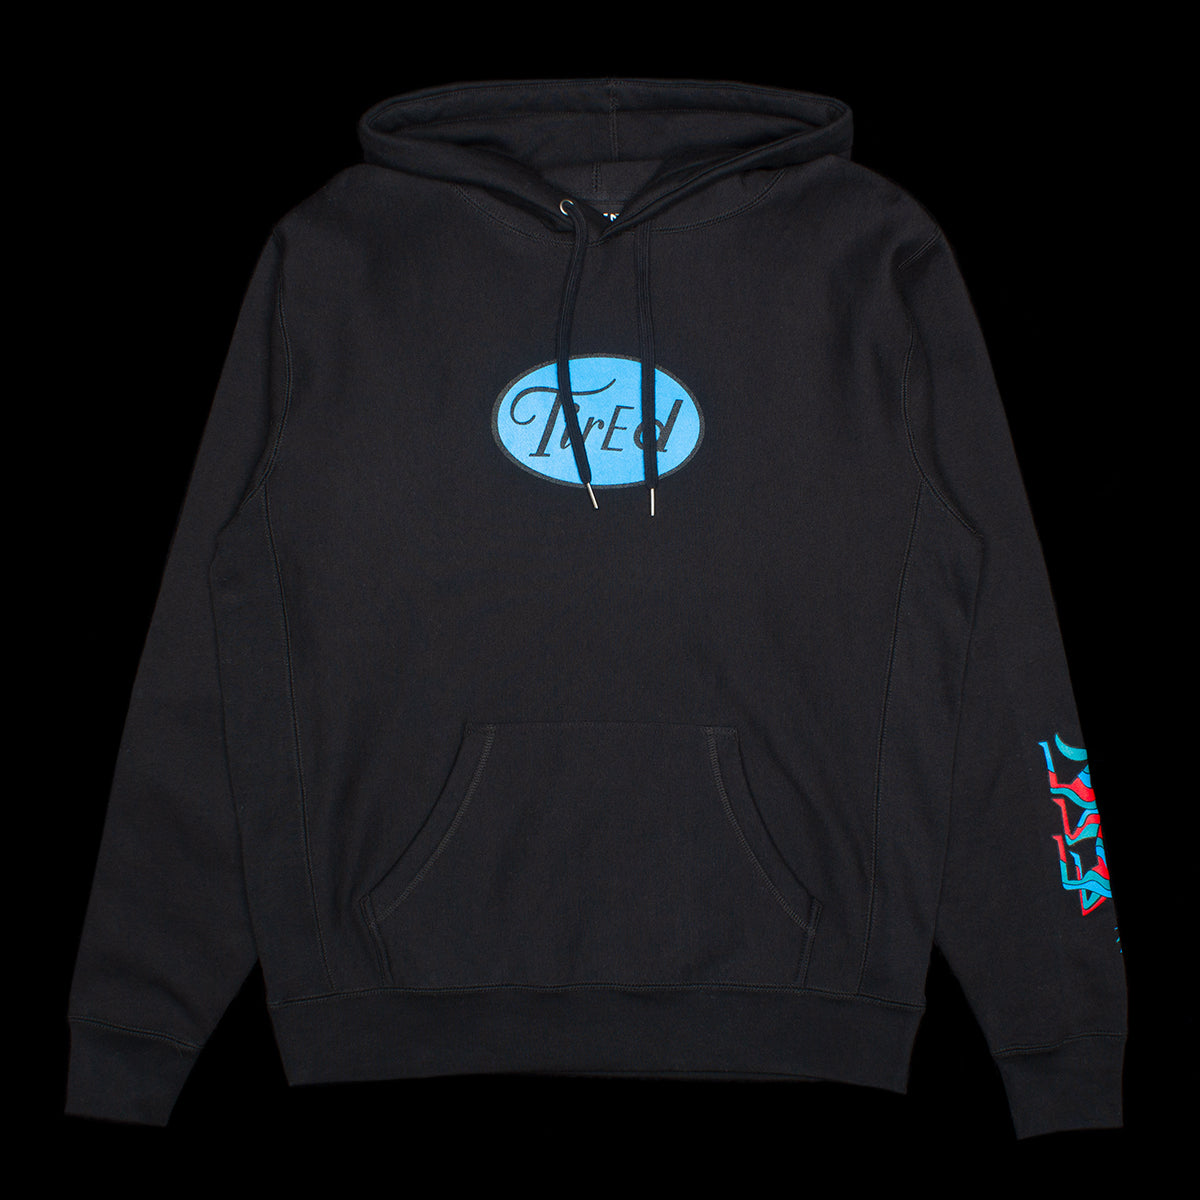 Tired Crawl Pullover Hoodie